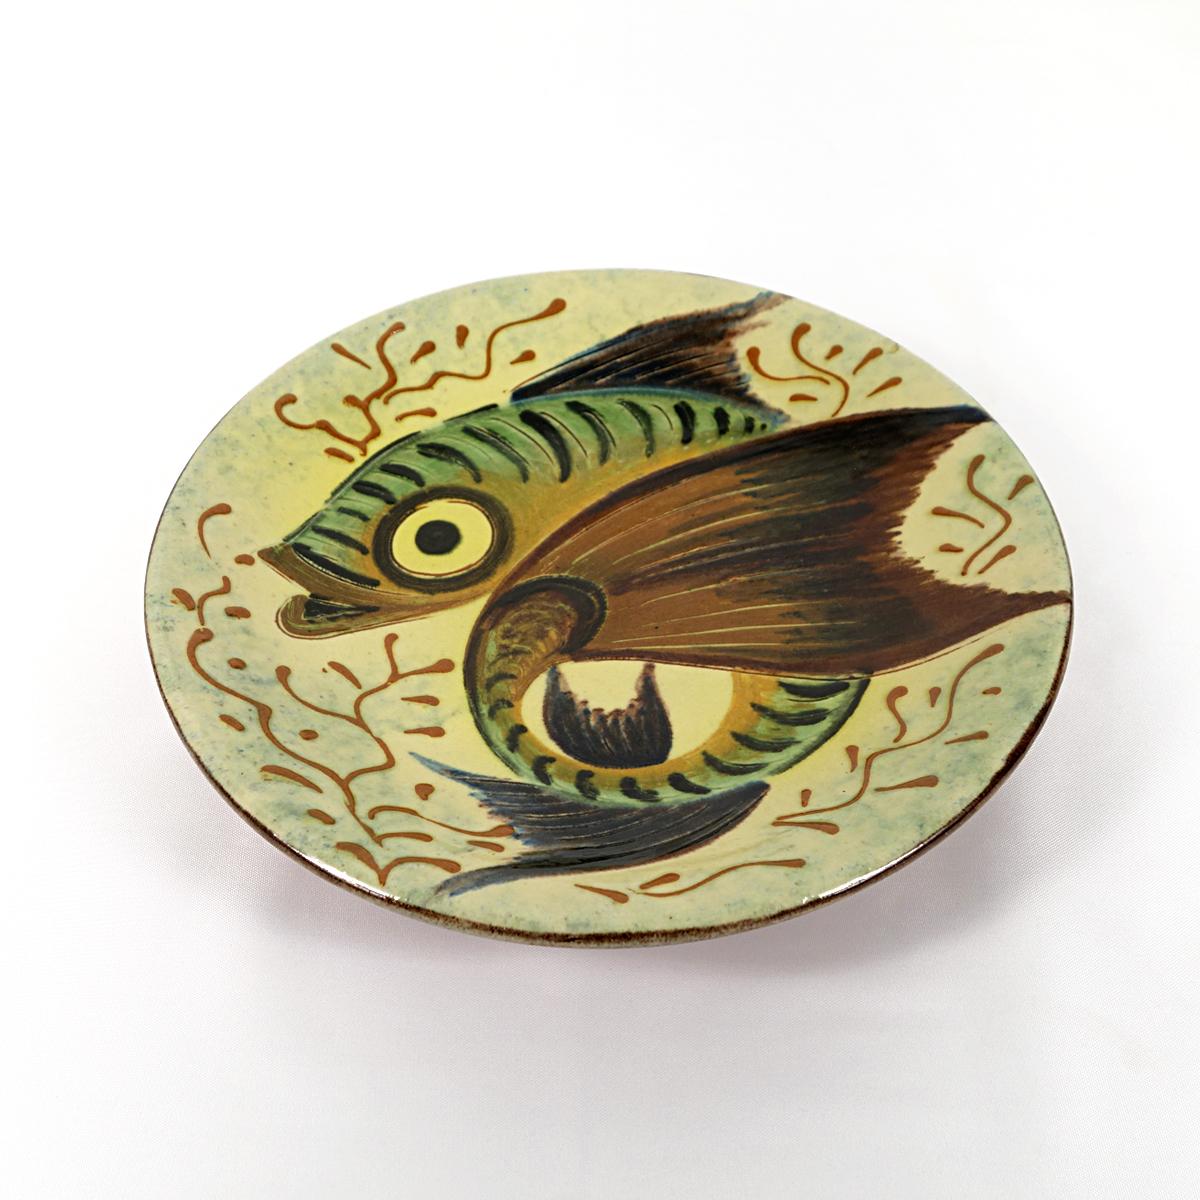 20th Century Set of 3 Ceramic Wall Plates with Fish Decor Signed by Spanish Maker Puigdemont